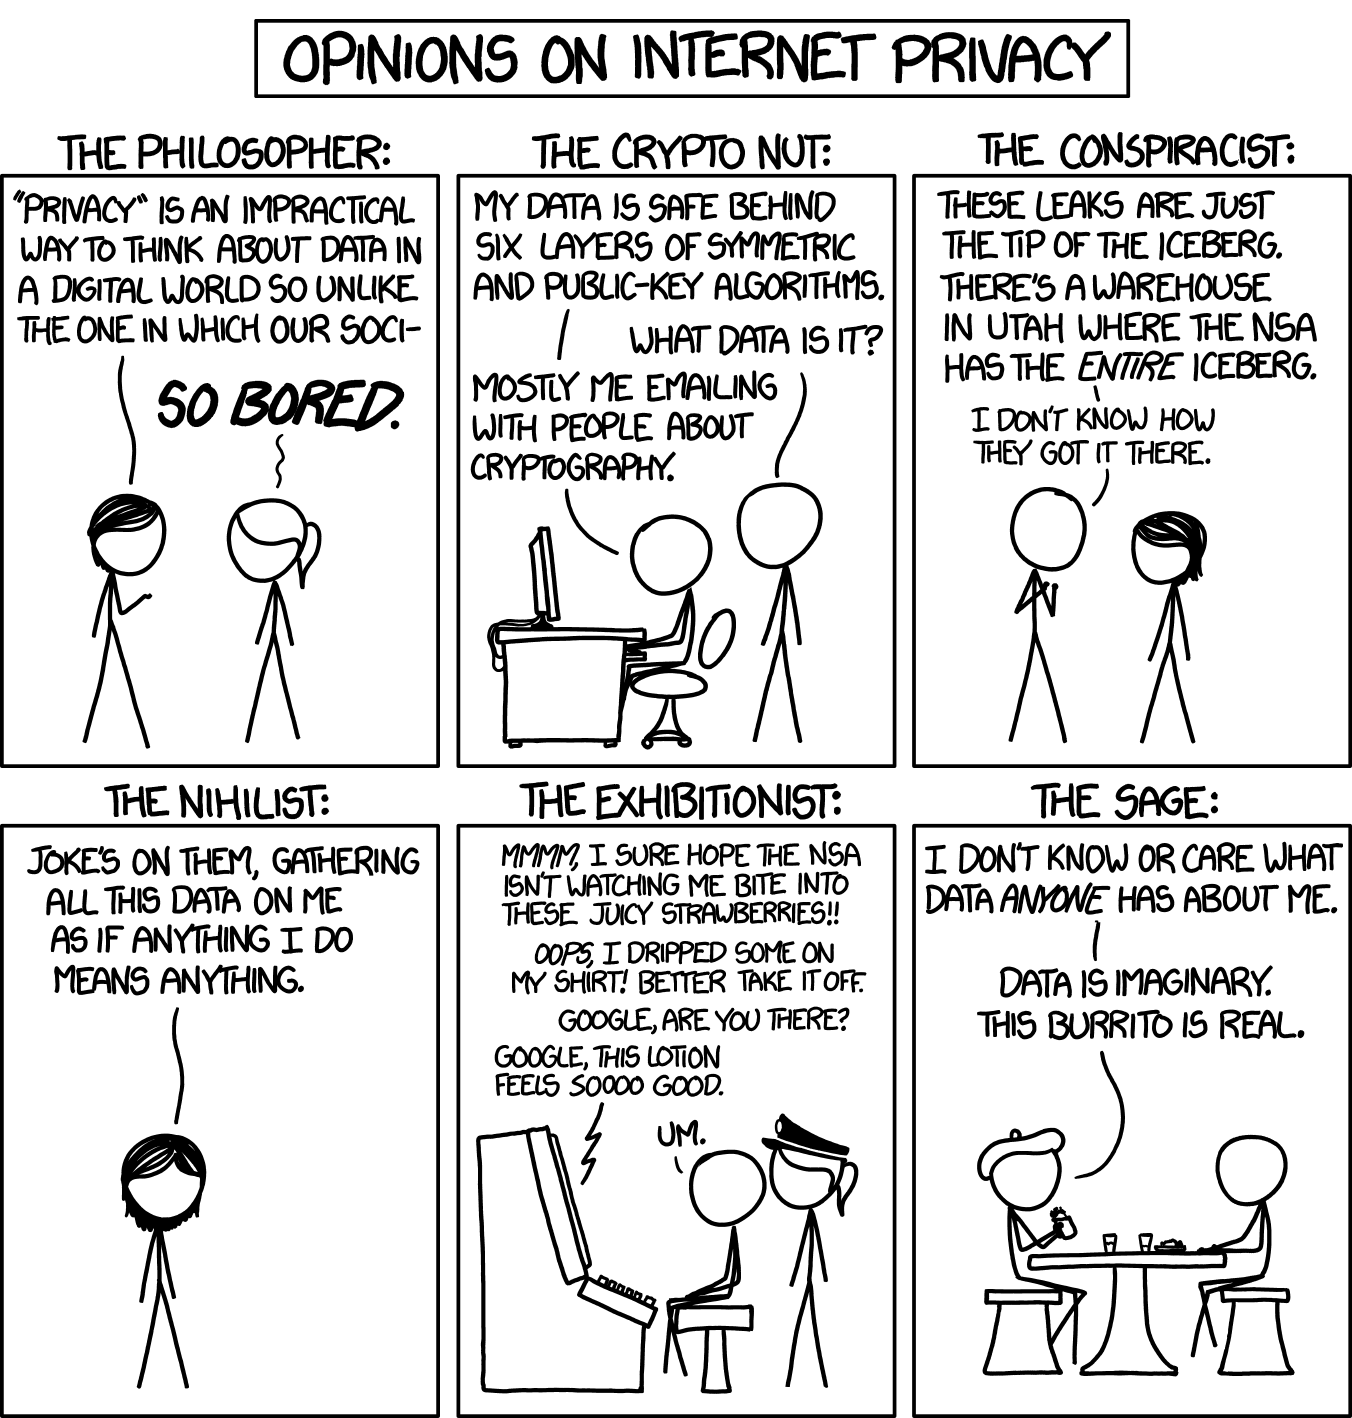 privacy_opinions_2x.png